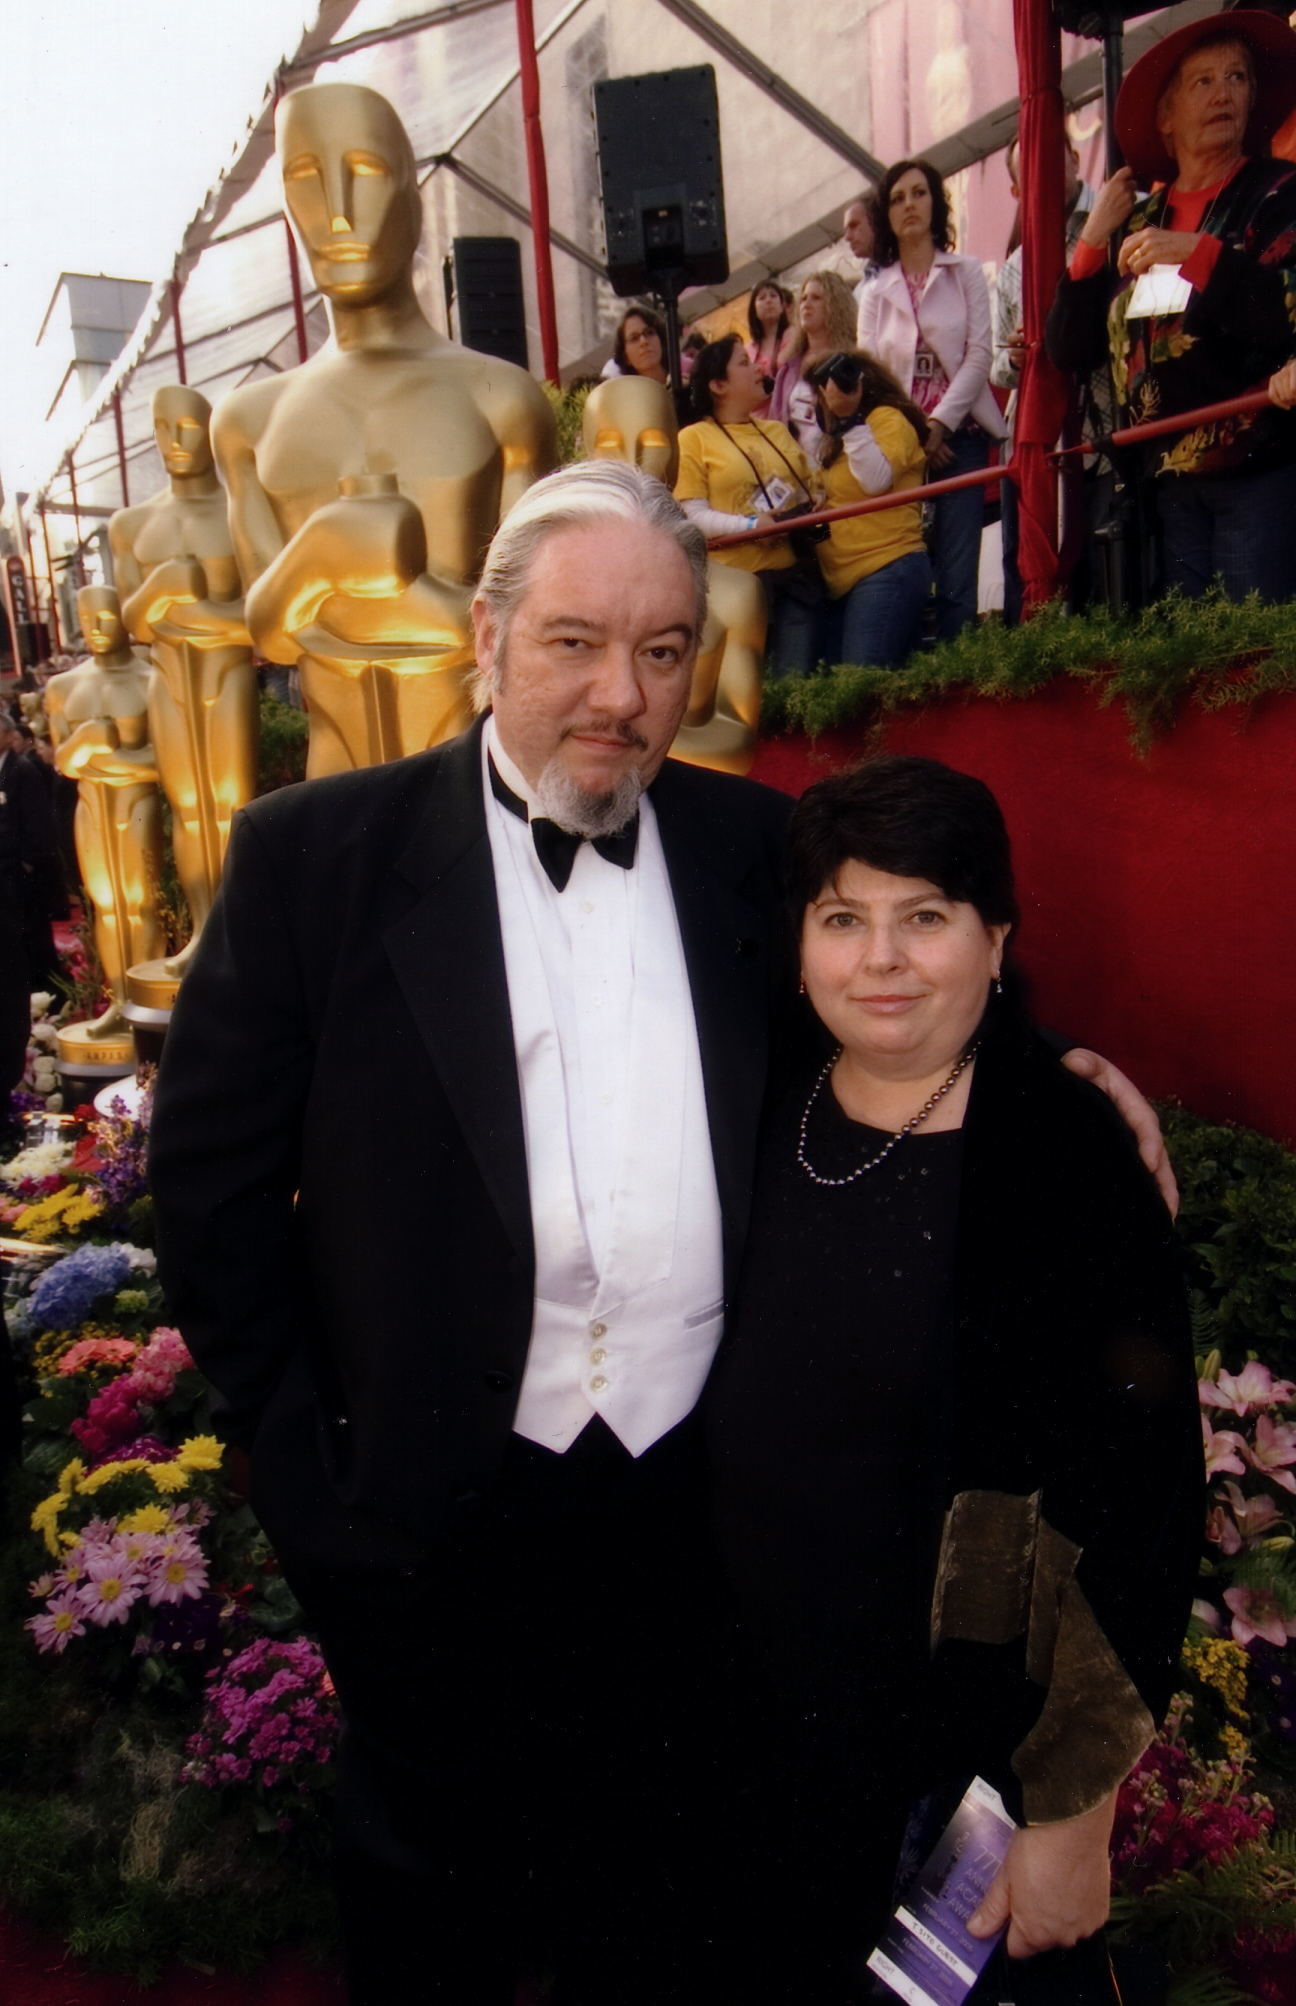 Tom and wife Pat at the Oscars, 2007